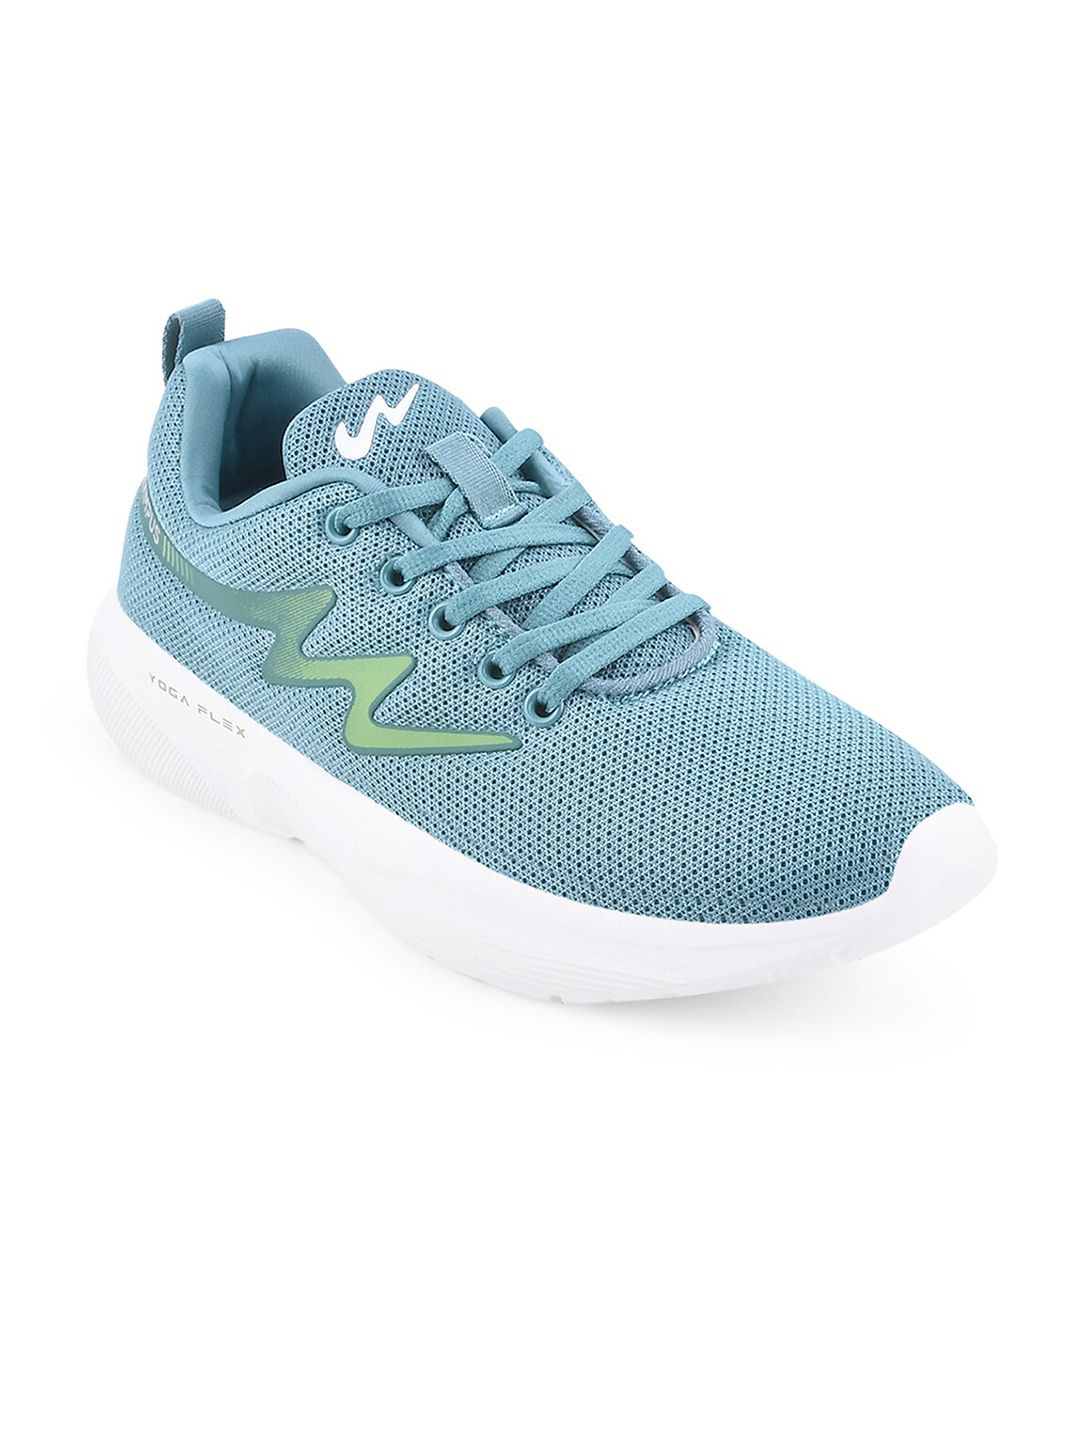 Campus Woman Mesh Running Shoes Price in India